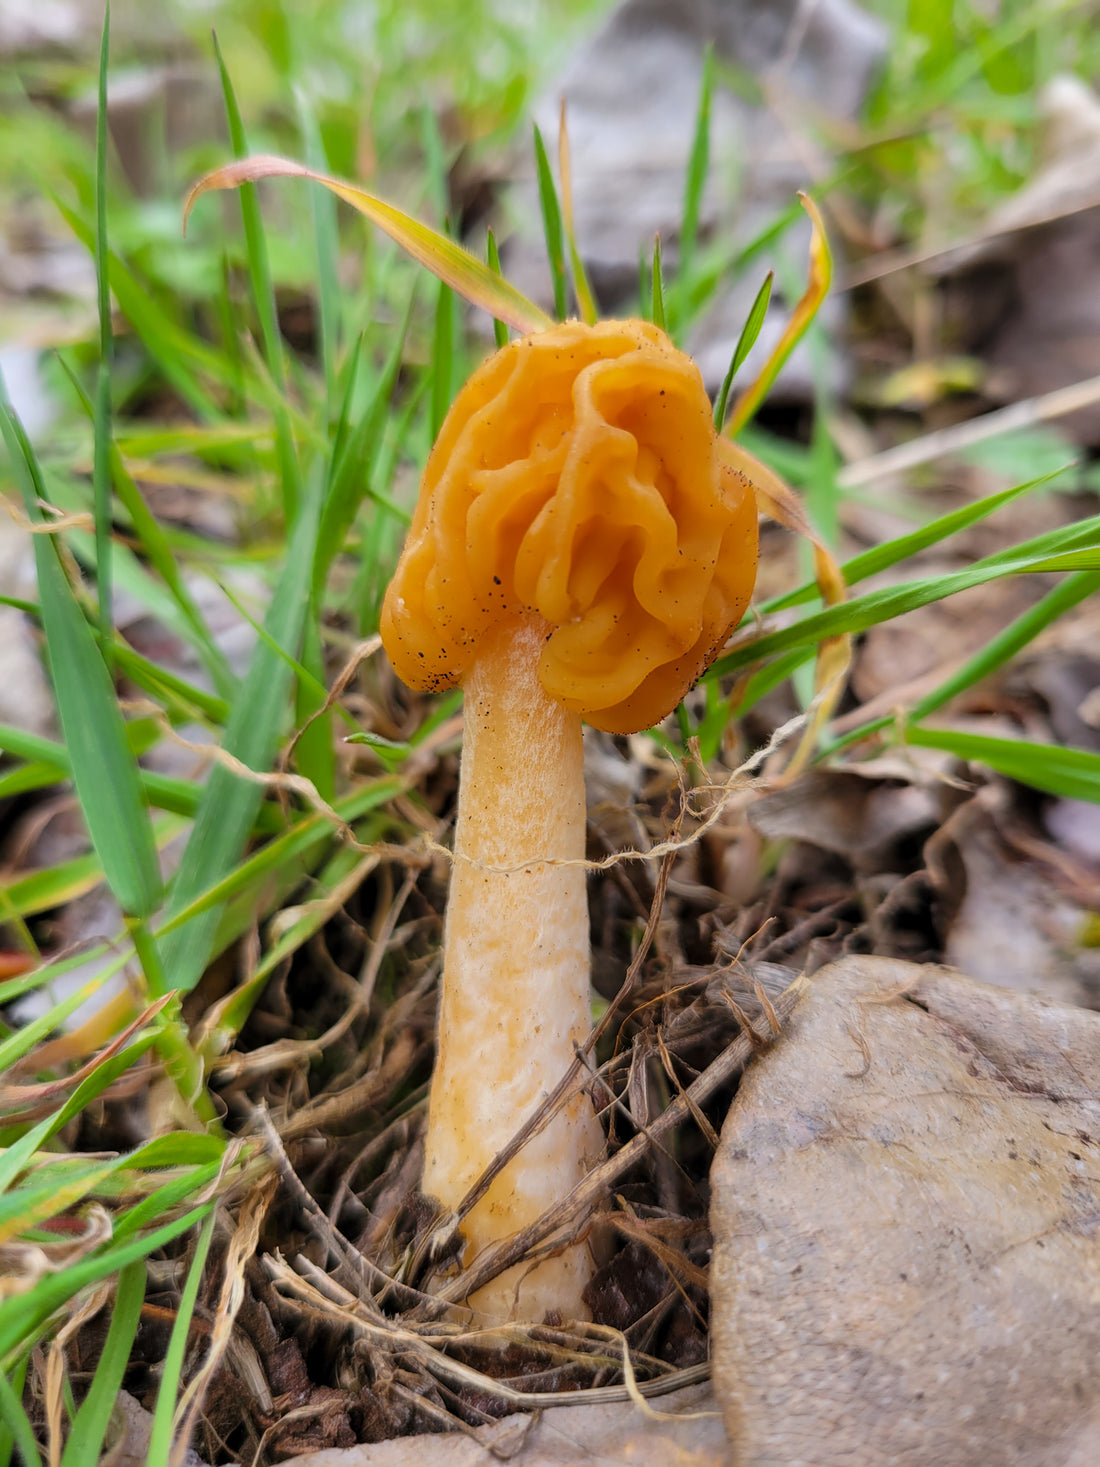 Early Morels: How to Find and Identify Verpa Mushrooms!